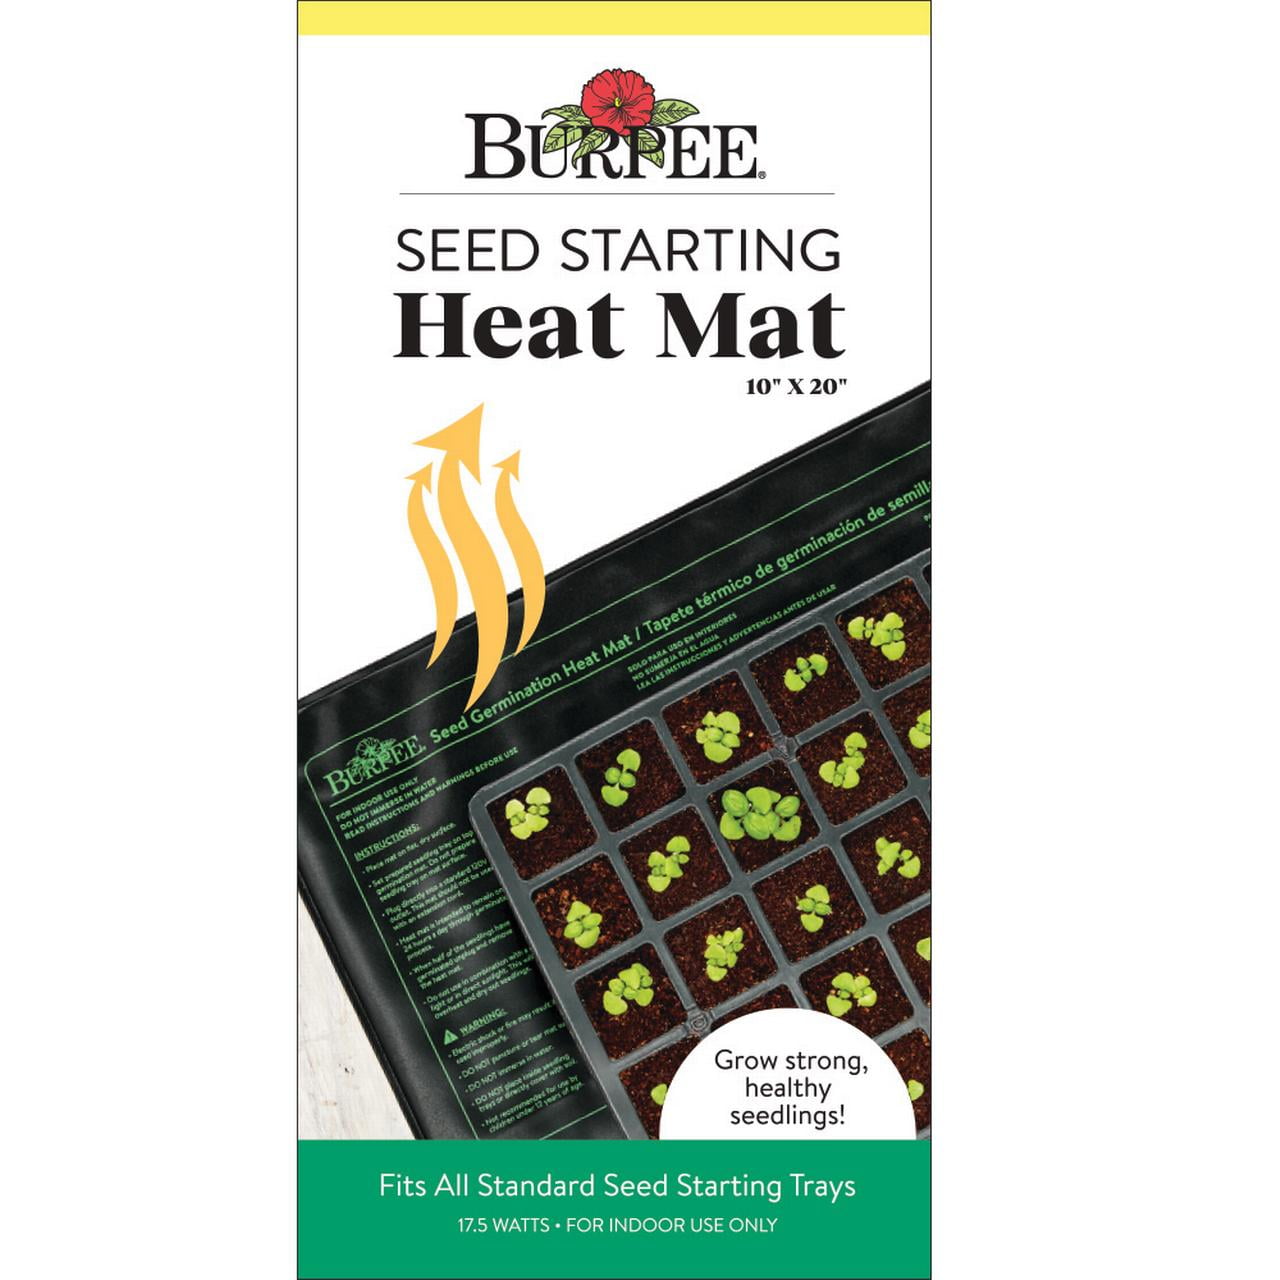 Burpee Seed Starting Heat Mat 10 inch x 20 inch - Fits All Standard Seed Starting Trays